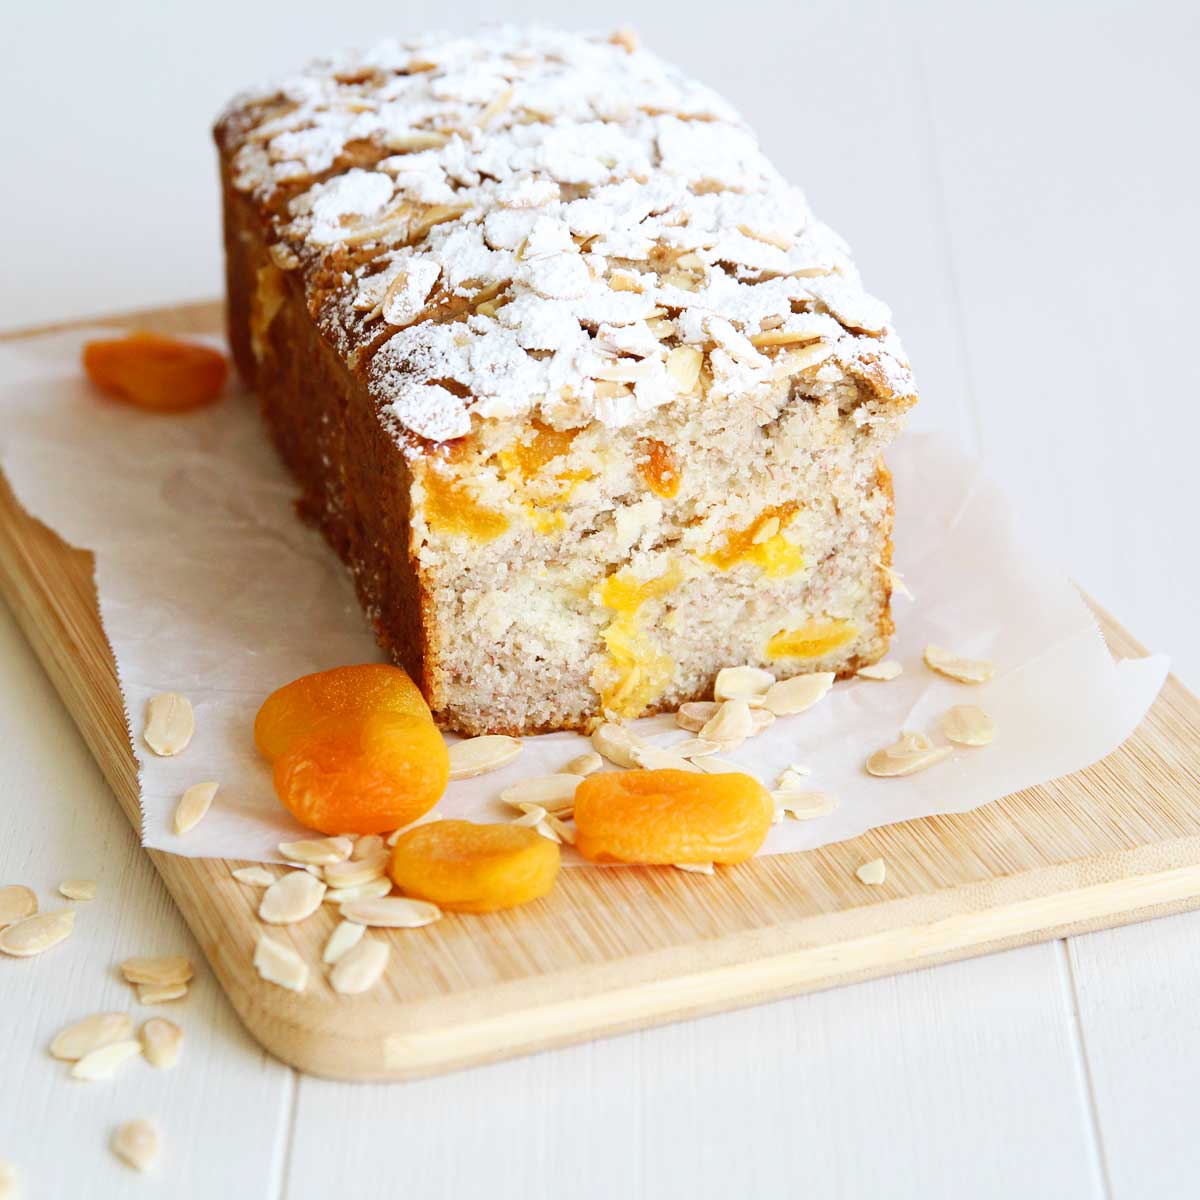 Simply Divine: Moist Vegan Almond Banana Bread with Apricots (Eggless, Dairy Free!) - Frosting